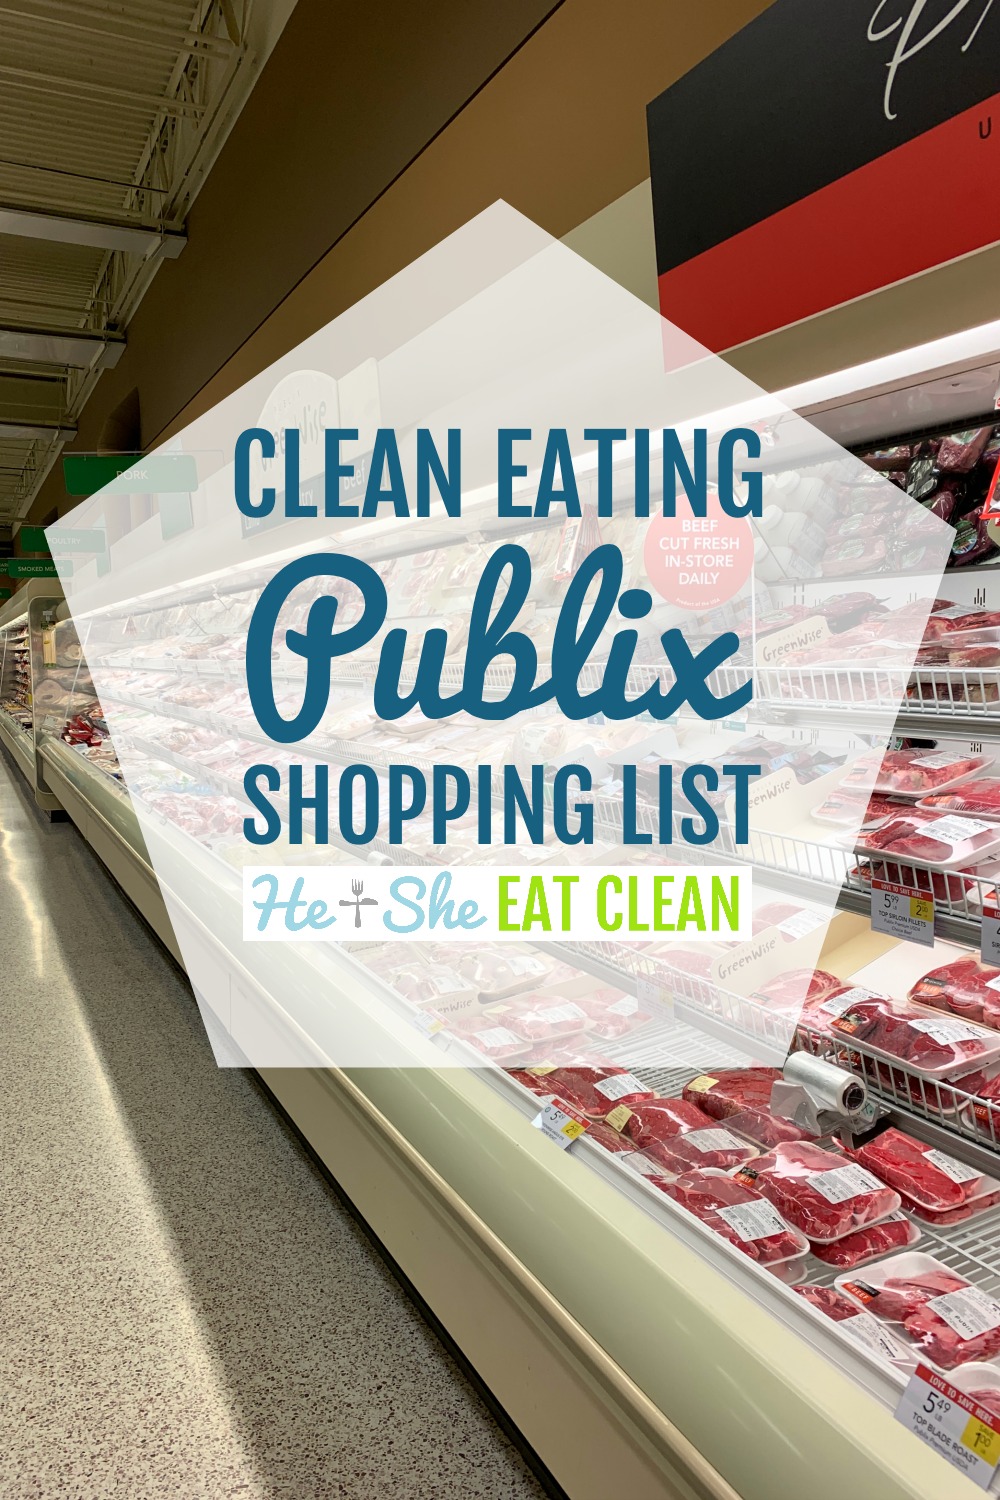 Publix - The bulk foods section is an easy choice for a tasty